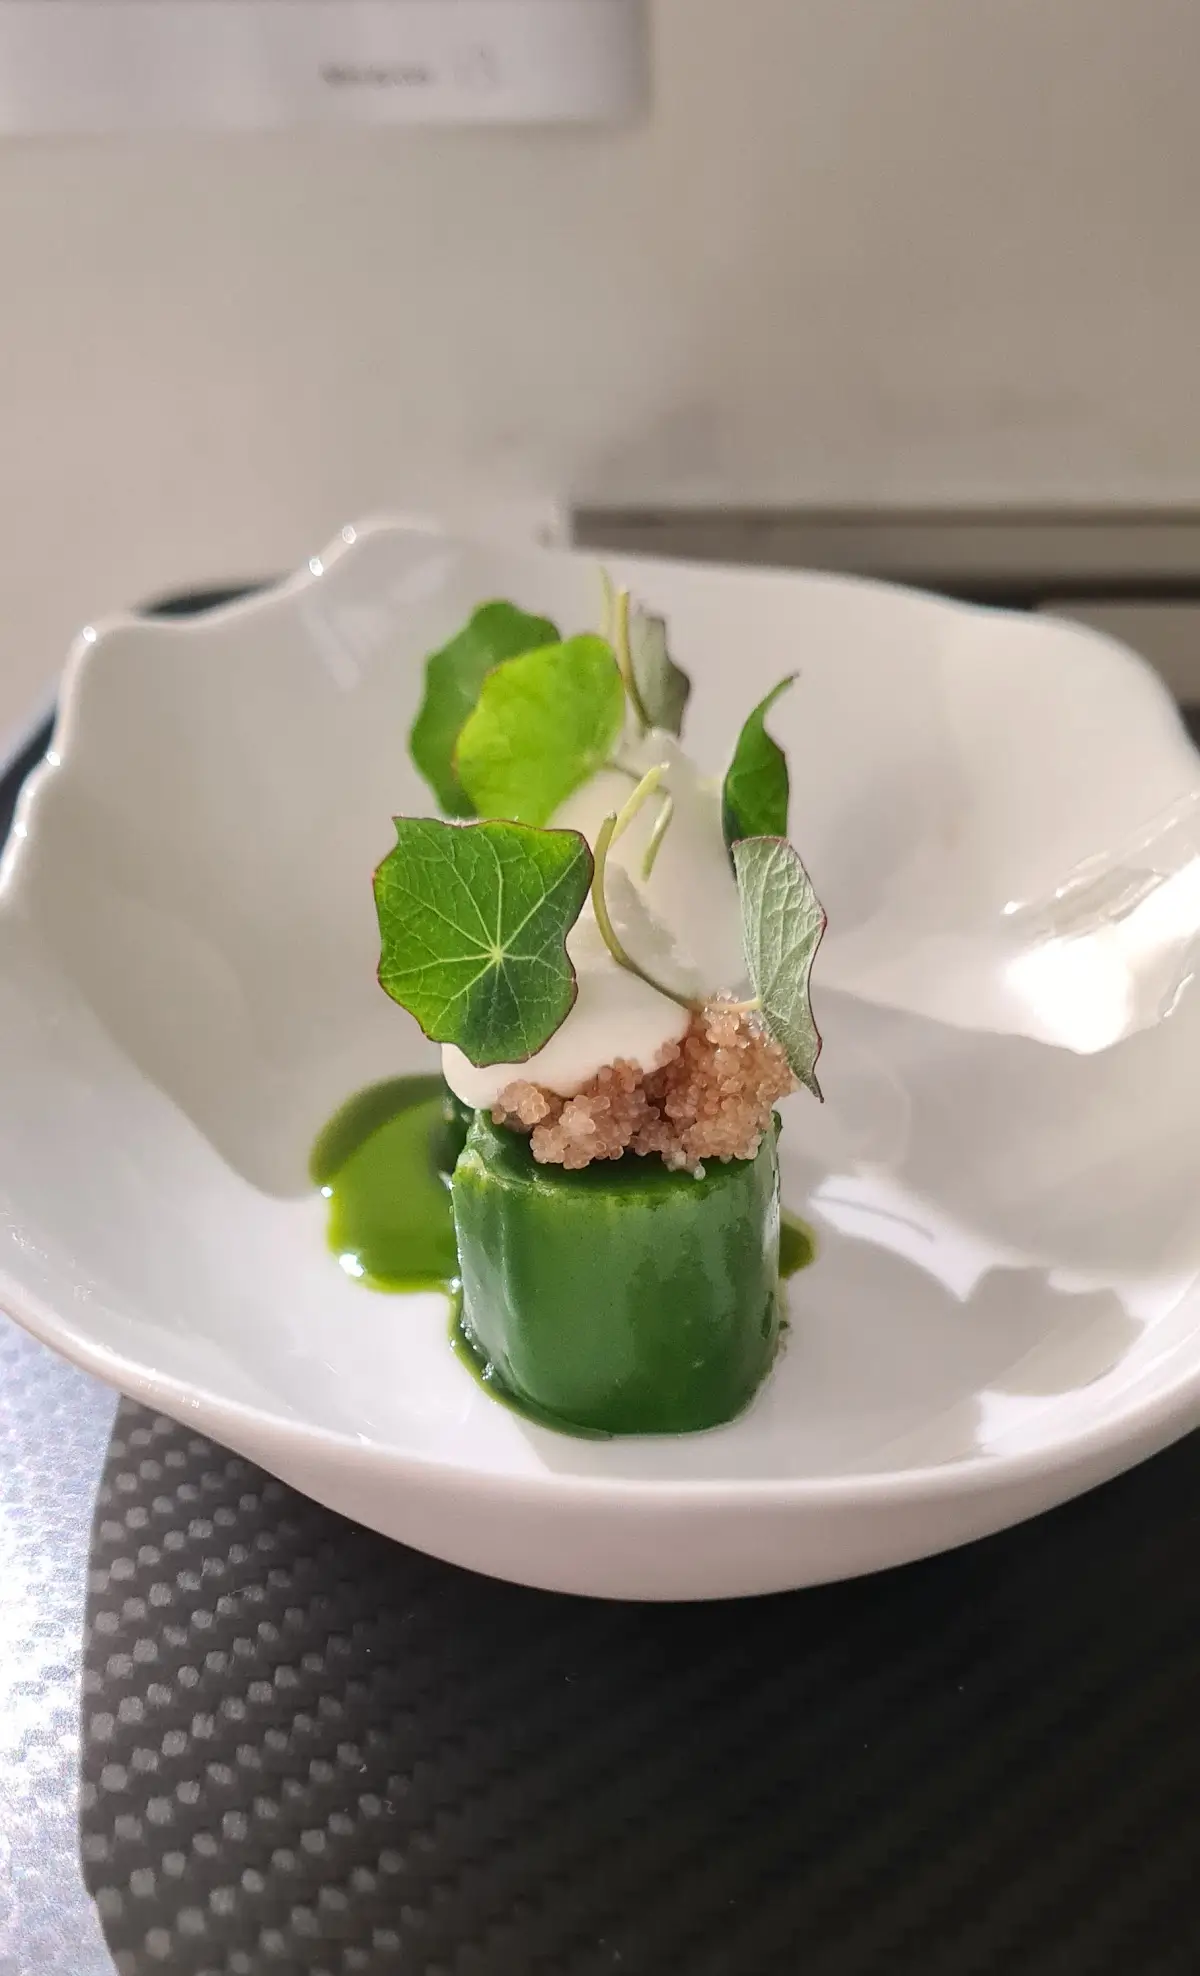 A gourmet dish at Restaurant Frederic Simonin, featuring a green vegetable roll topped with cream and microgreens.